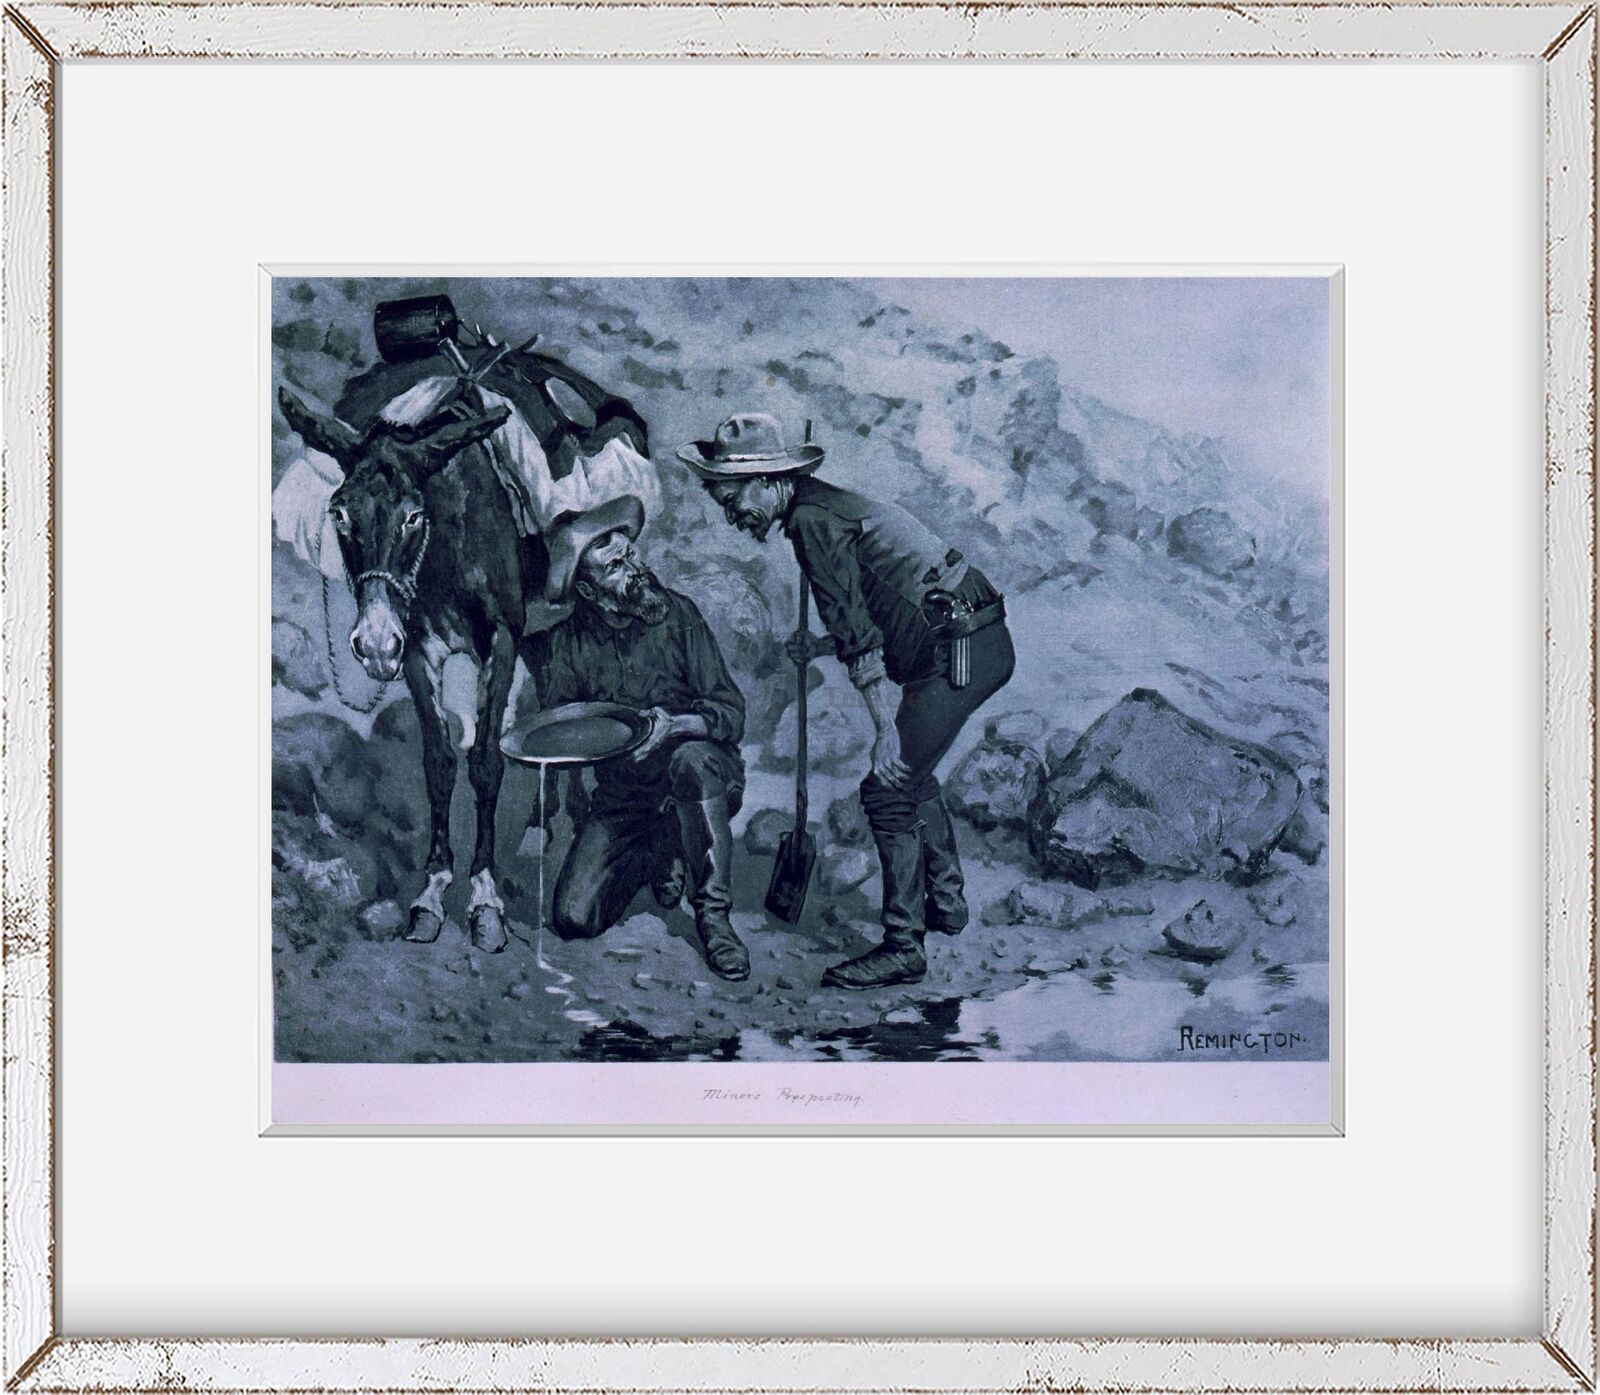 Photo: Miners Prospecting, Mules, Gold Mining, panning, Industry, Donkey, F Remi